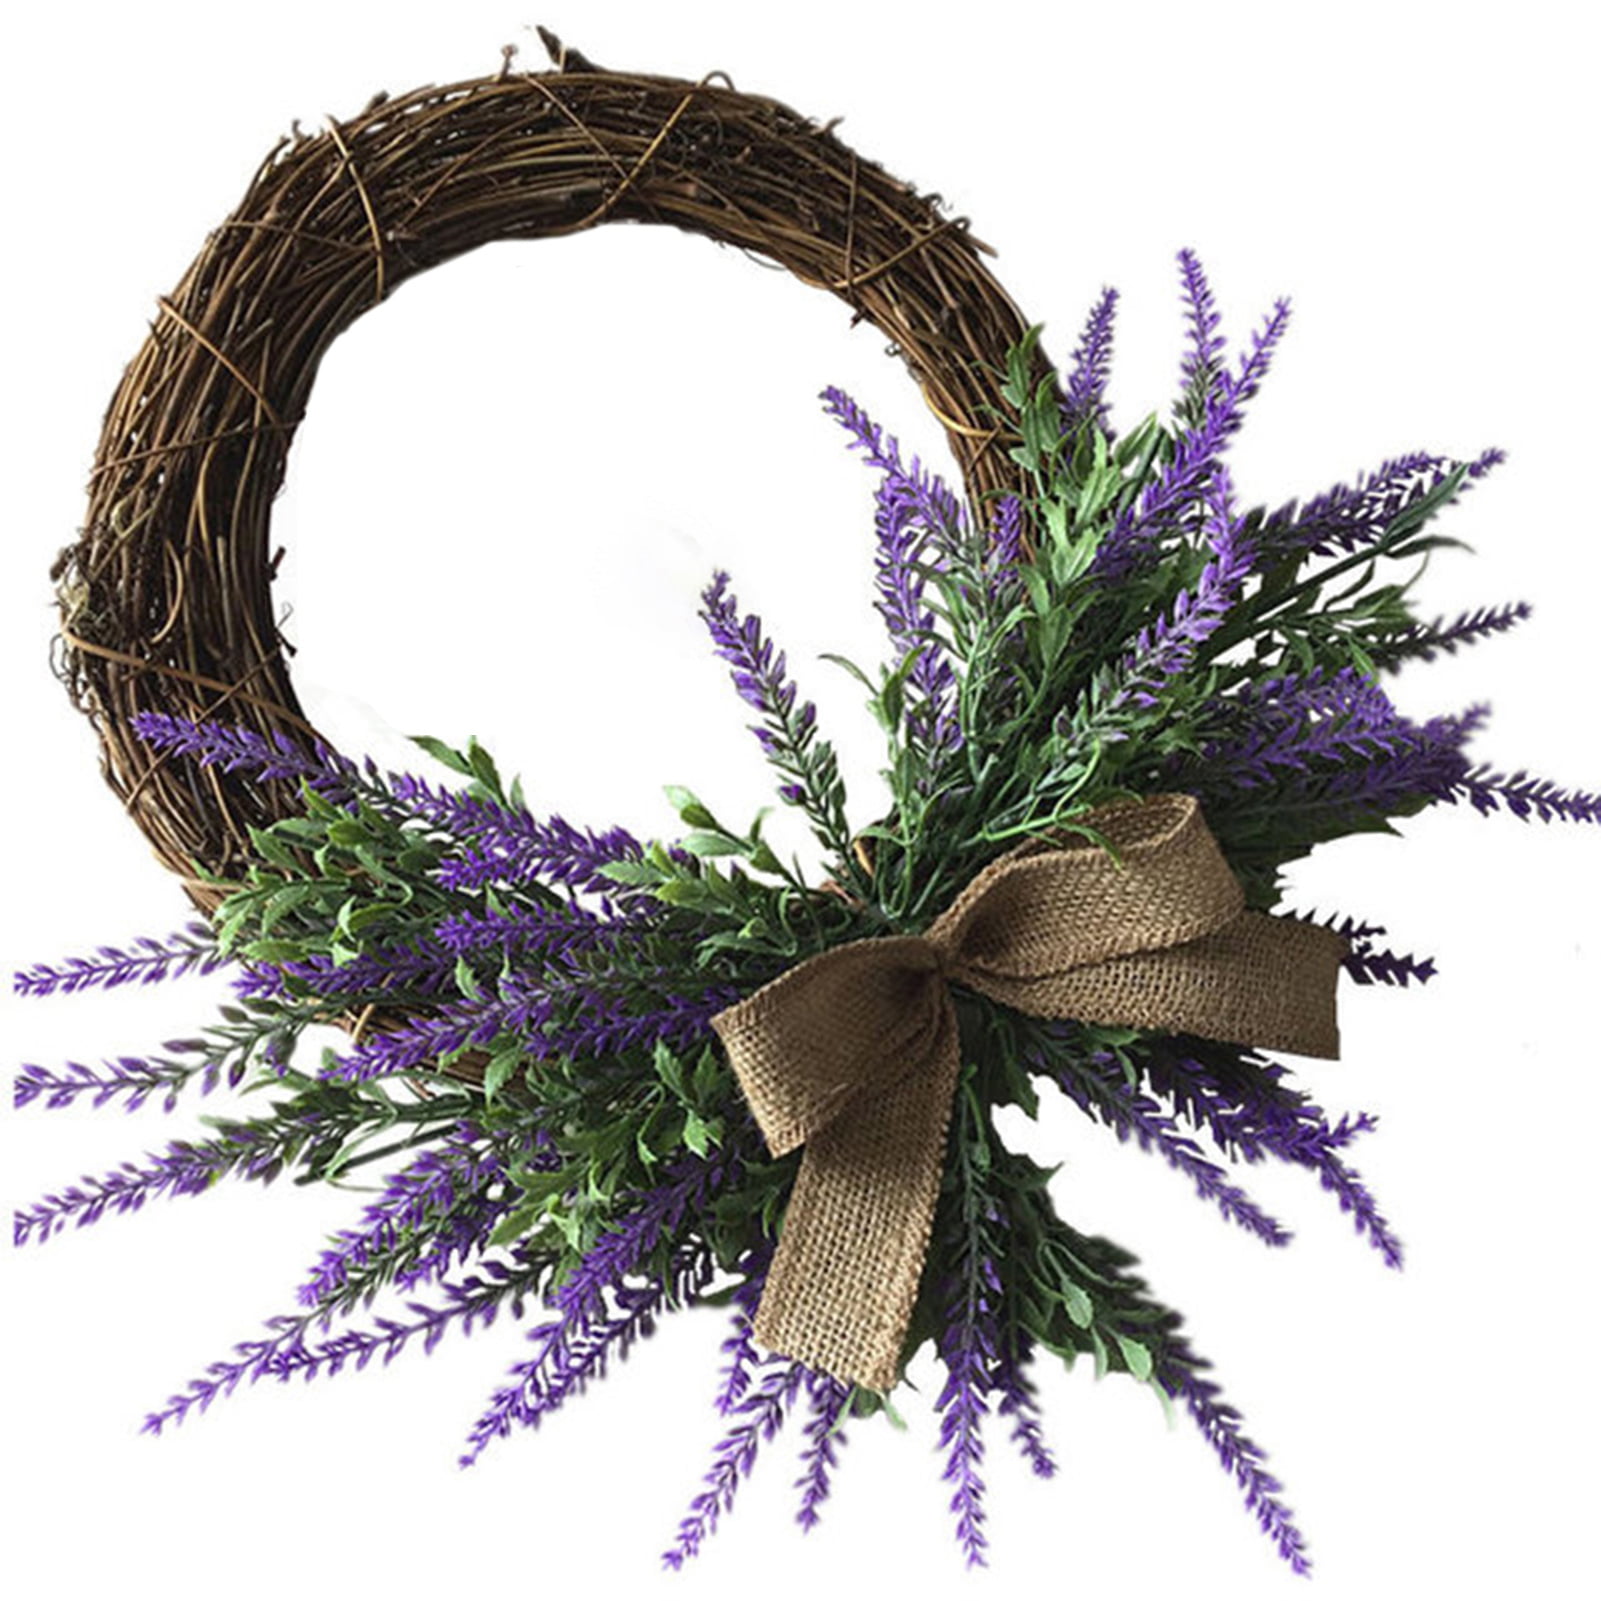 Lavender Flower Wreath for Front Door Purple Summer Artificial Flower Wreath Rattan Spring Garland for Door Window Wall Garden Farmhouse Hanging Wedding Home Decor with Bow-Knot Ornament 